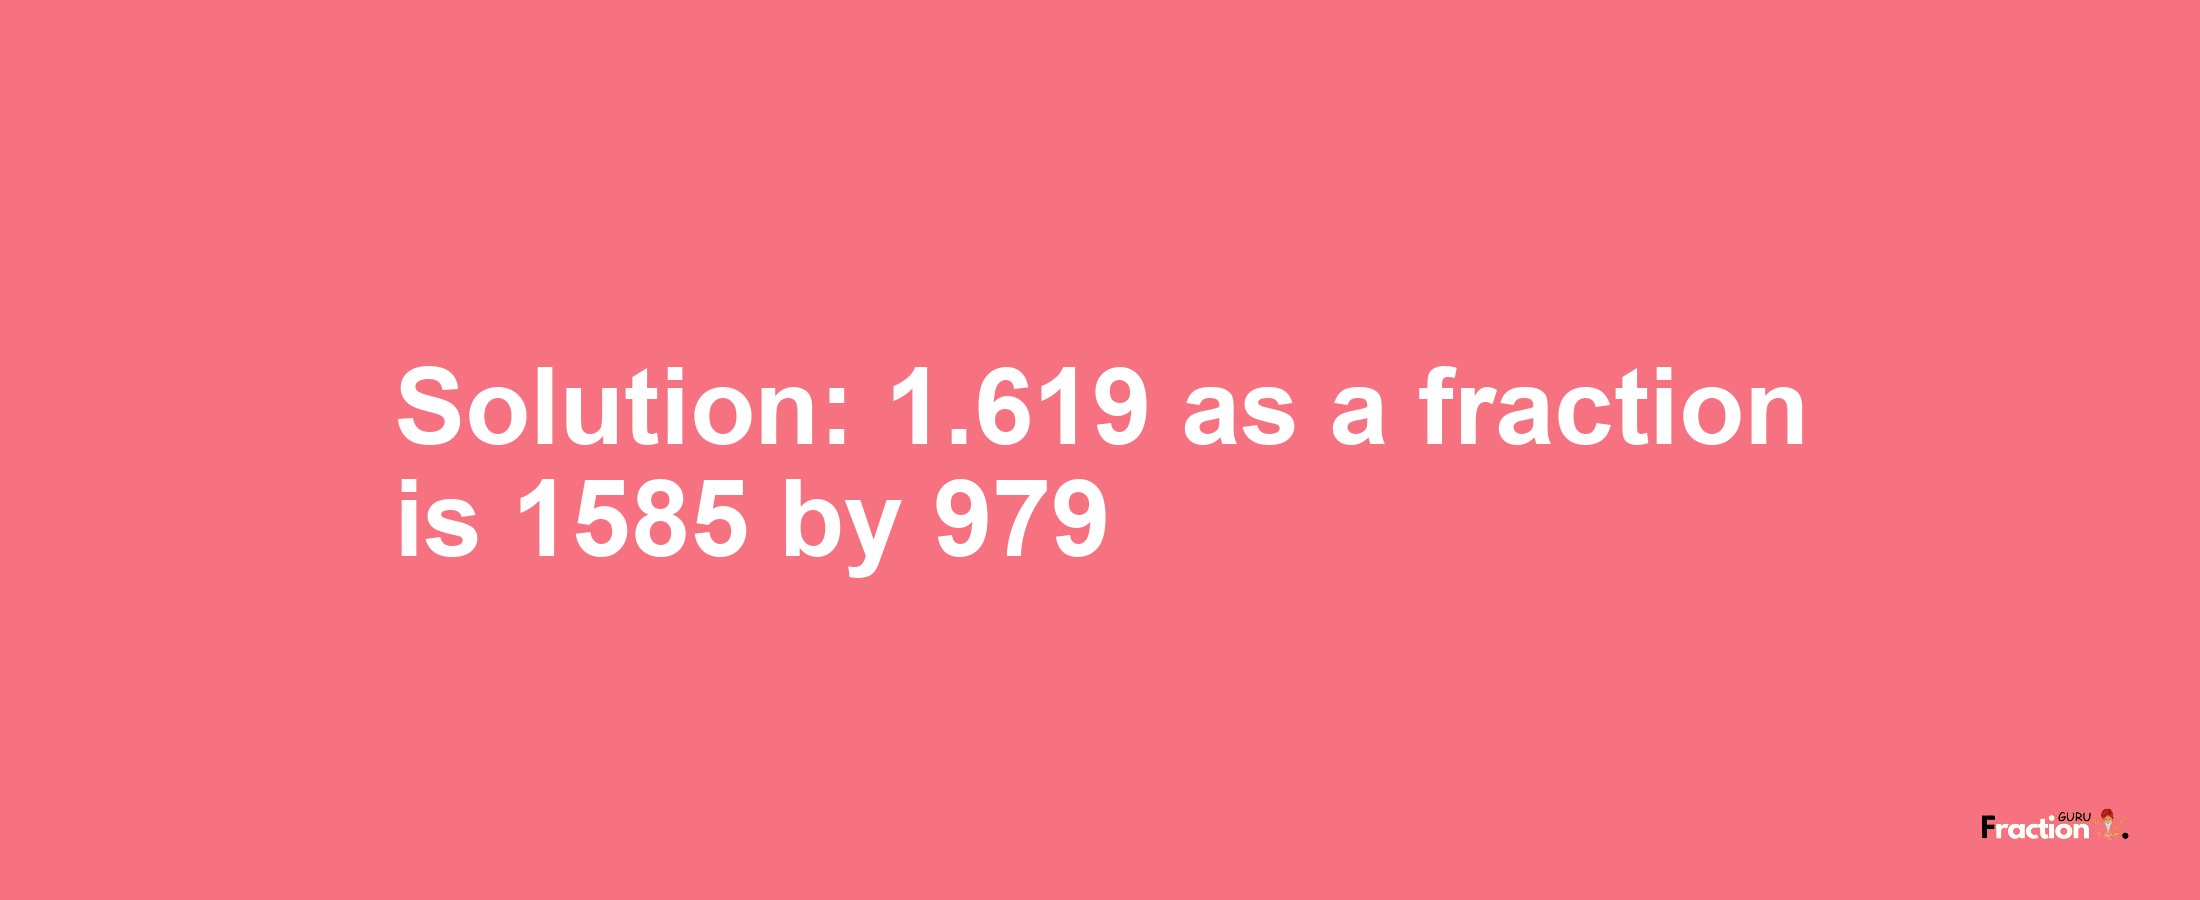 Solution:1.619 as a fraction is 1585/979